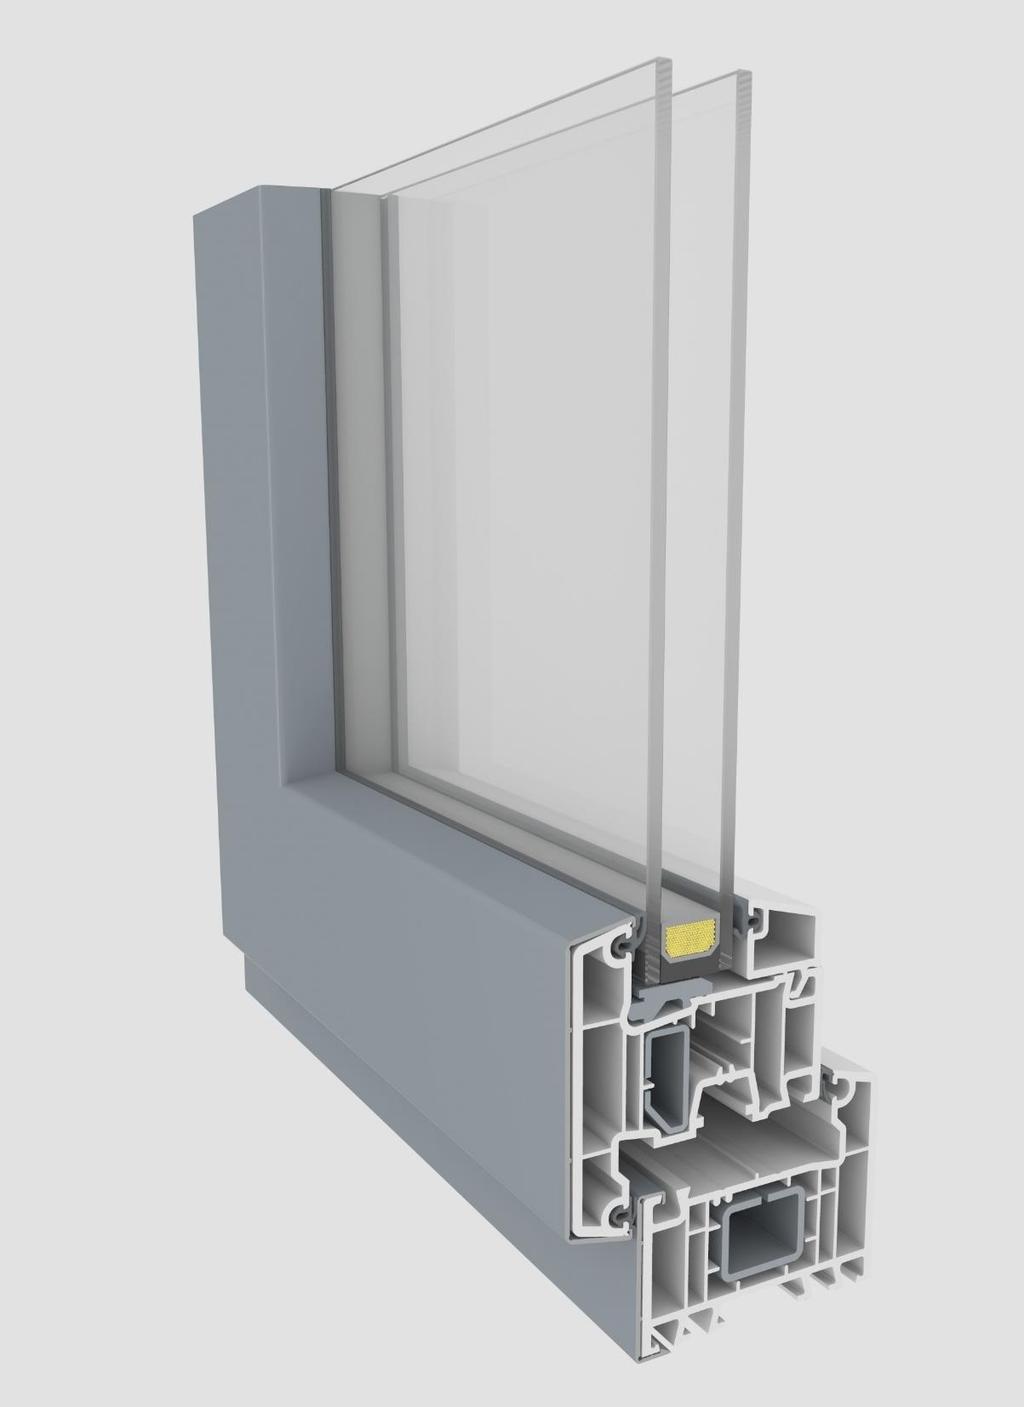 Ideal 4000 is a NEW Contemporary design Pvcu window and door system incorporating the latest SqareLine profile design.